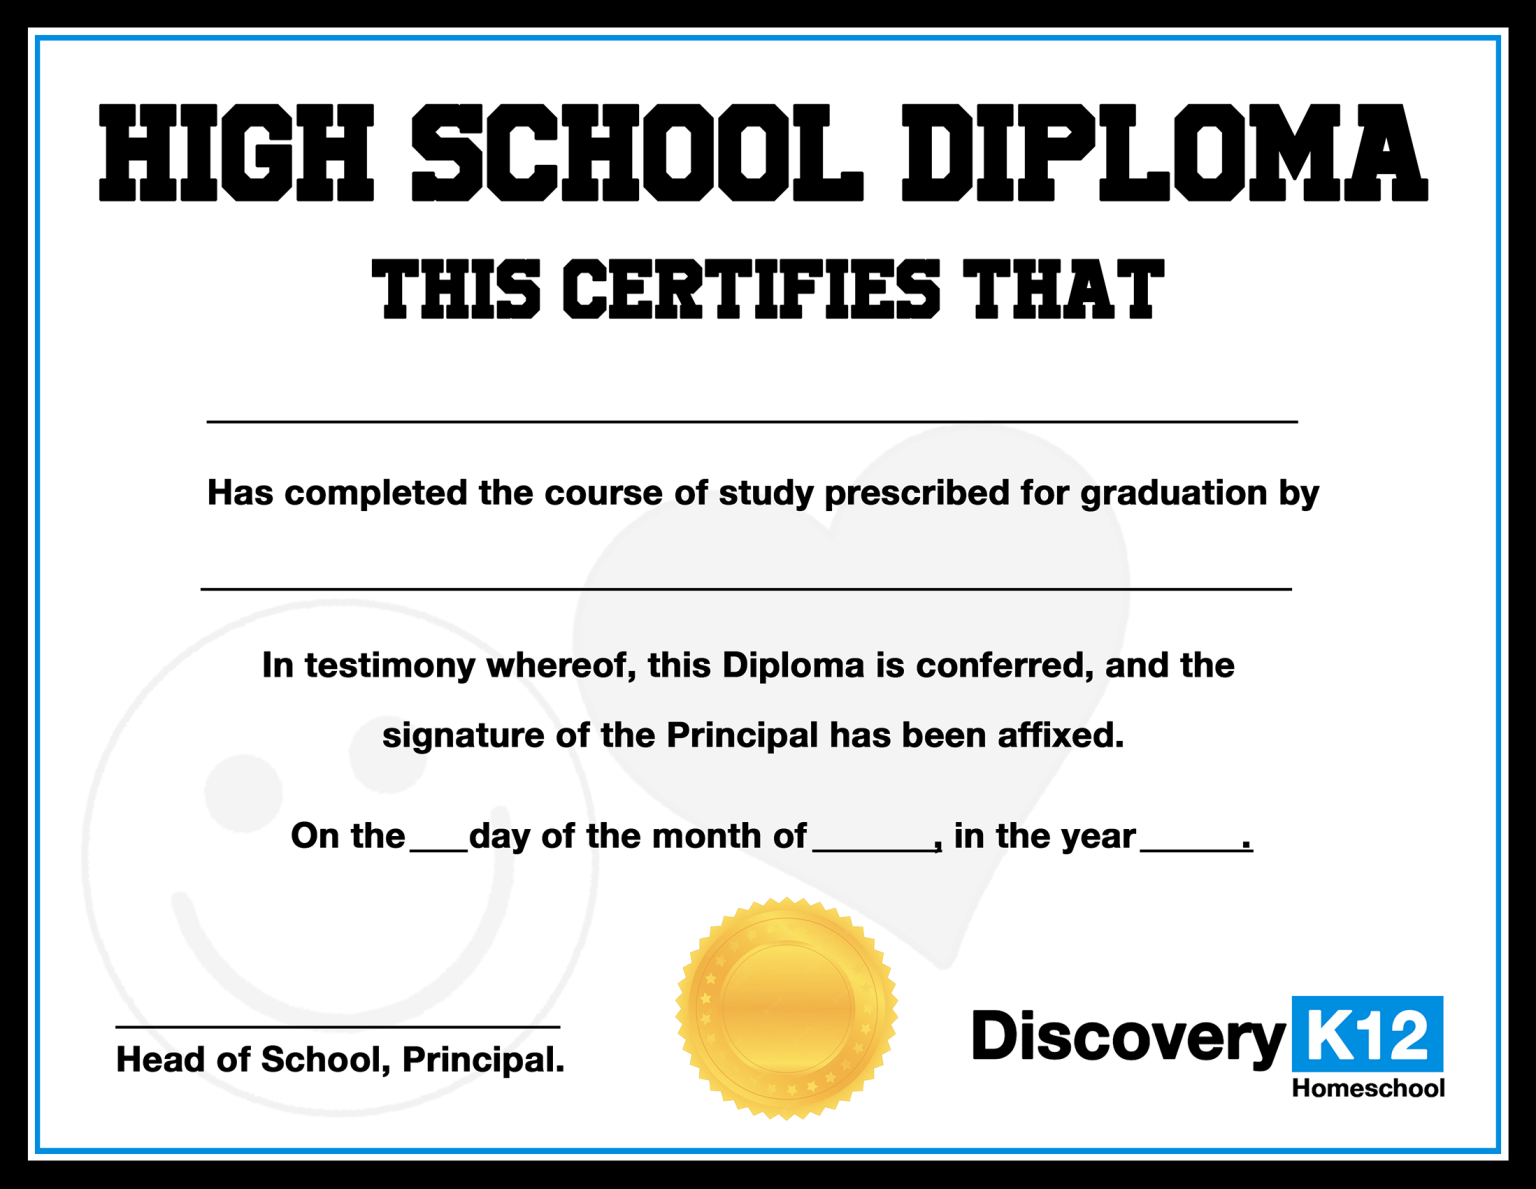 Discovery K12 Printable Course